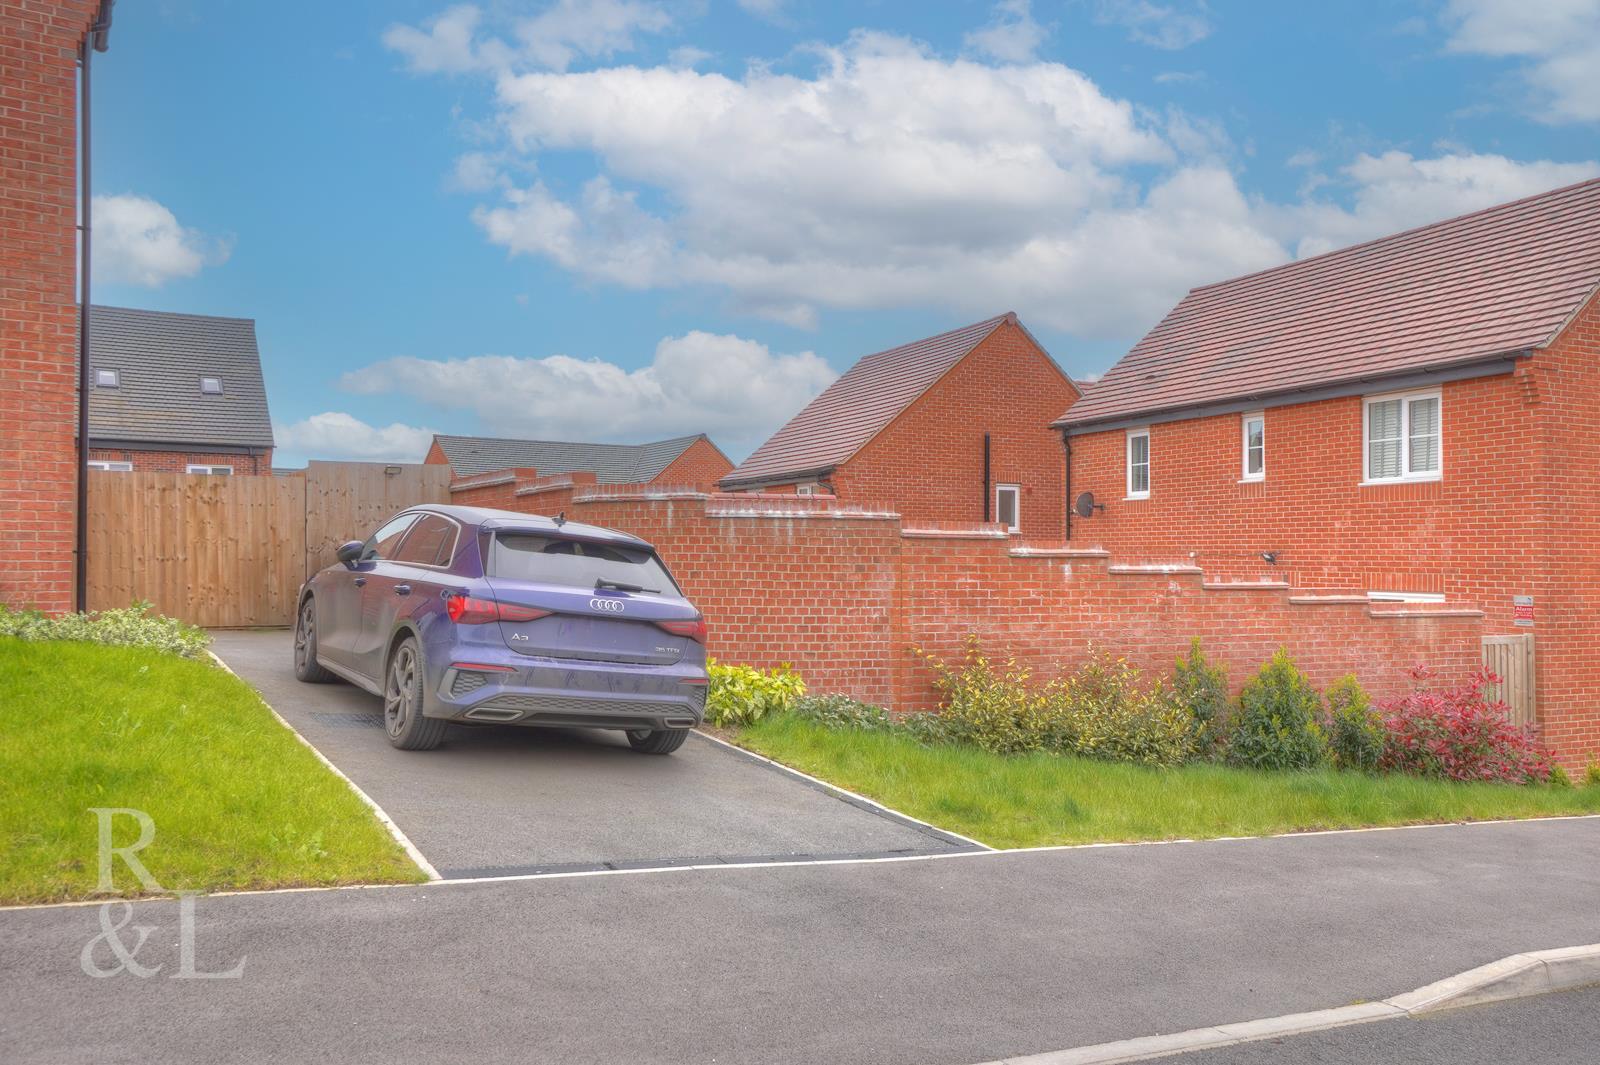 Property image for Dilston Way, Chellaston, Derby